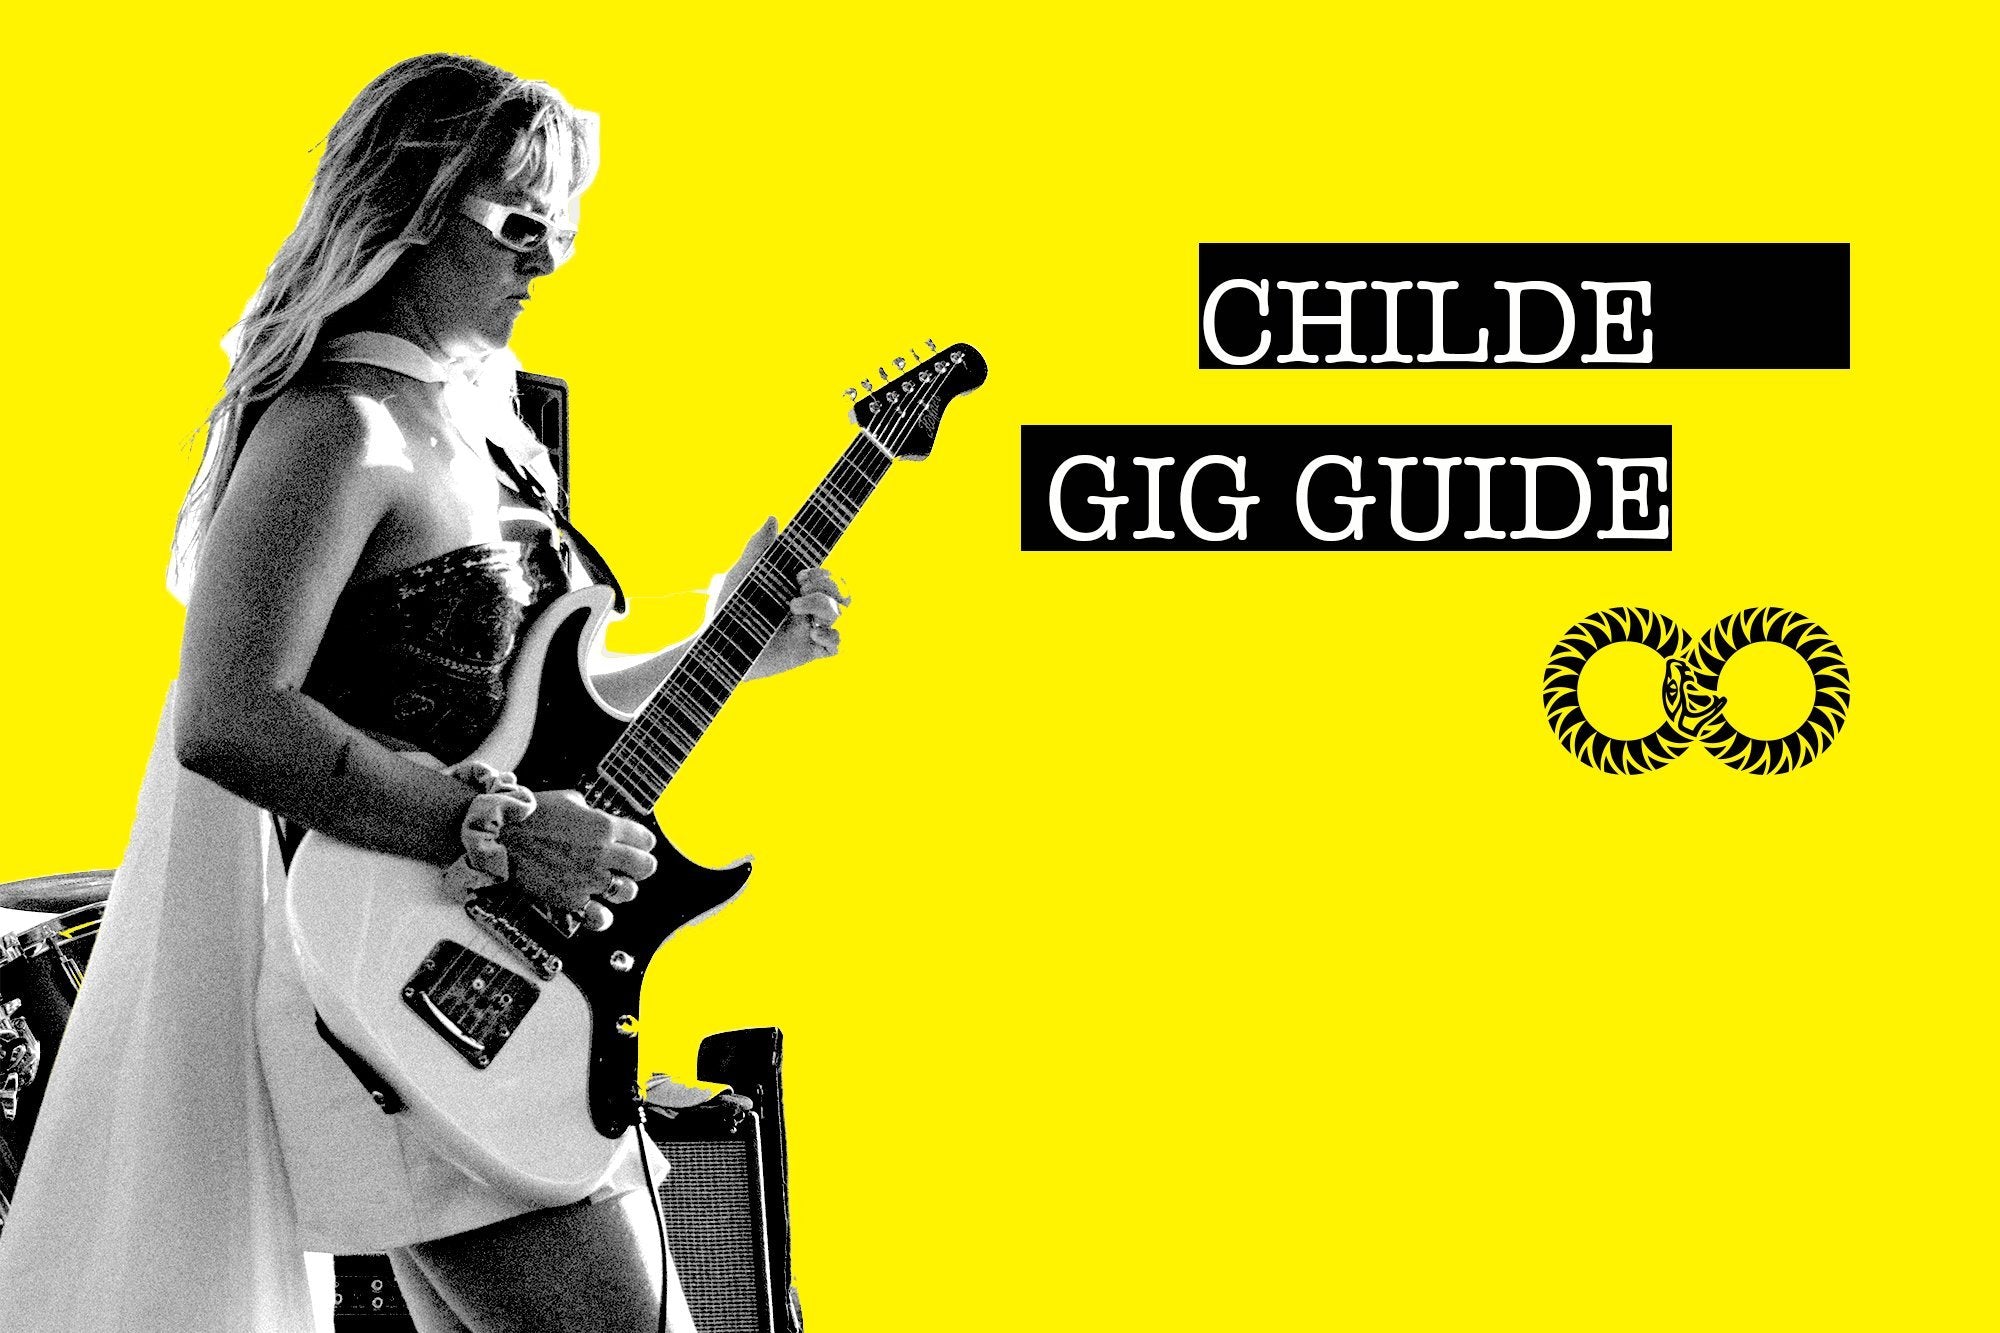 CHILDE | Gig Guide (August 21)